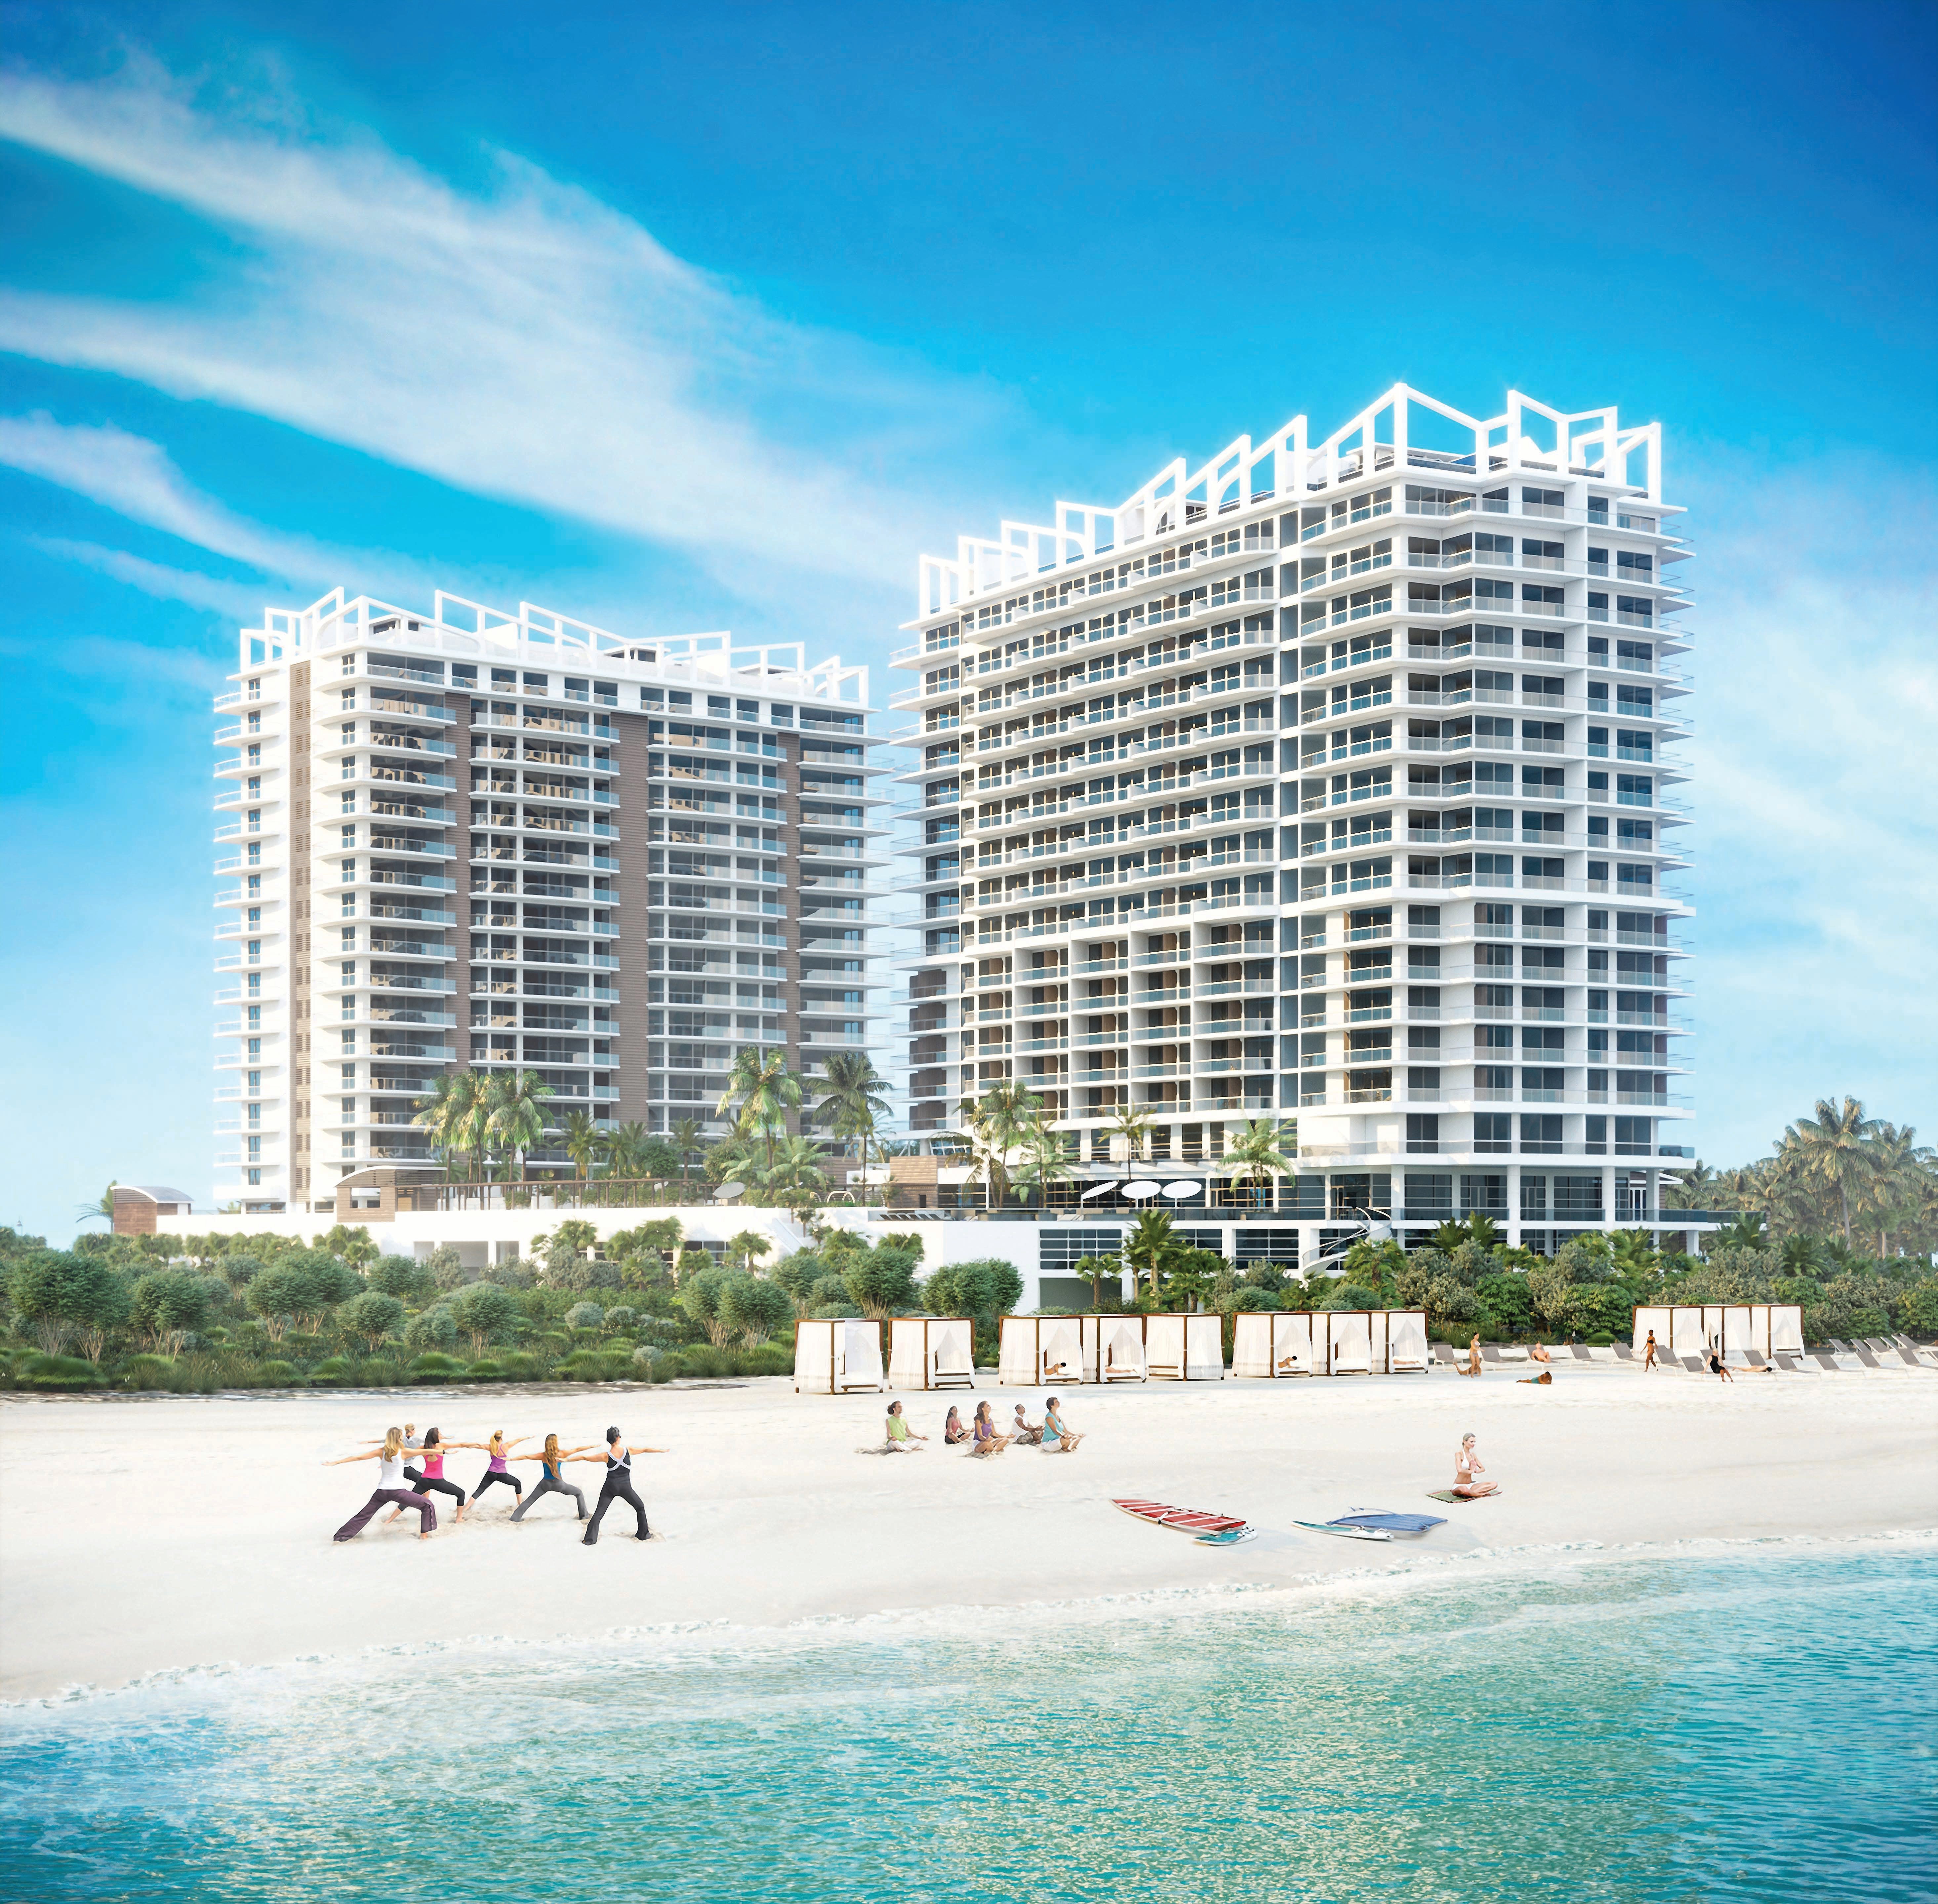 Singer Island is a quick drive to West Palm Beach close to the main highways and 15 minutes from Palm Beach International ai